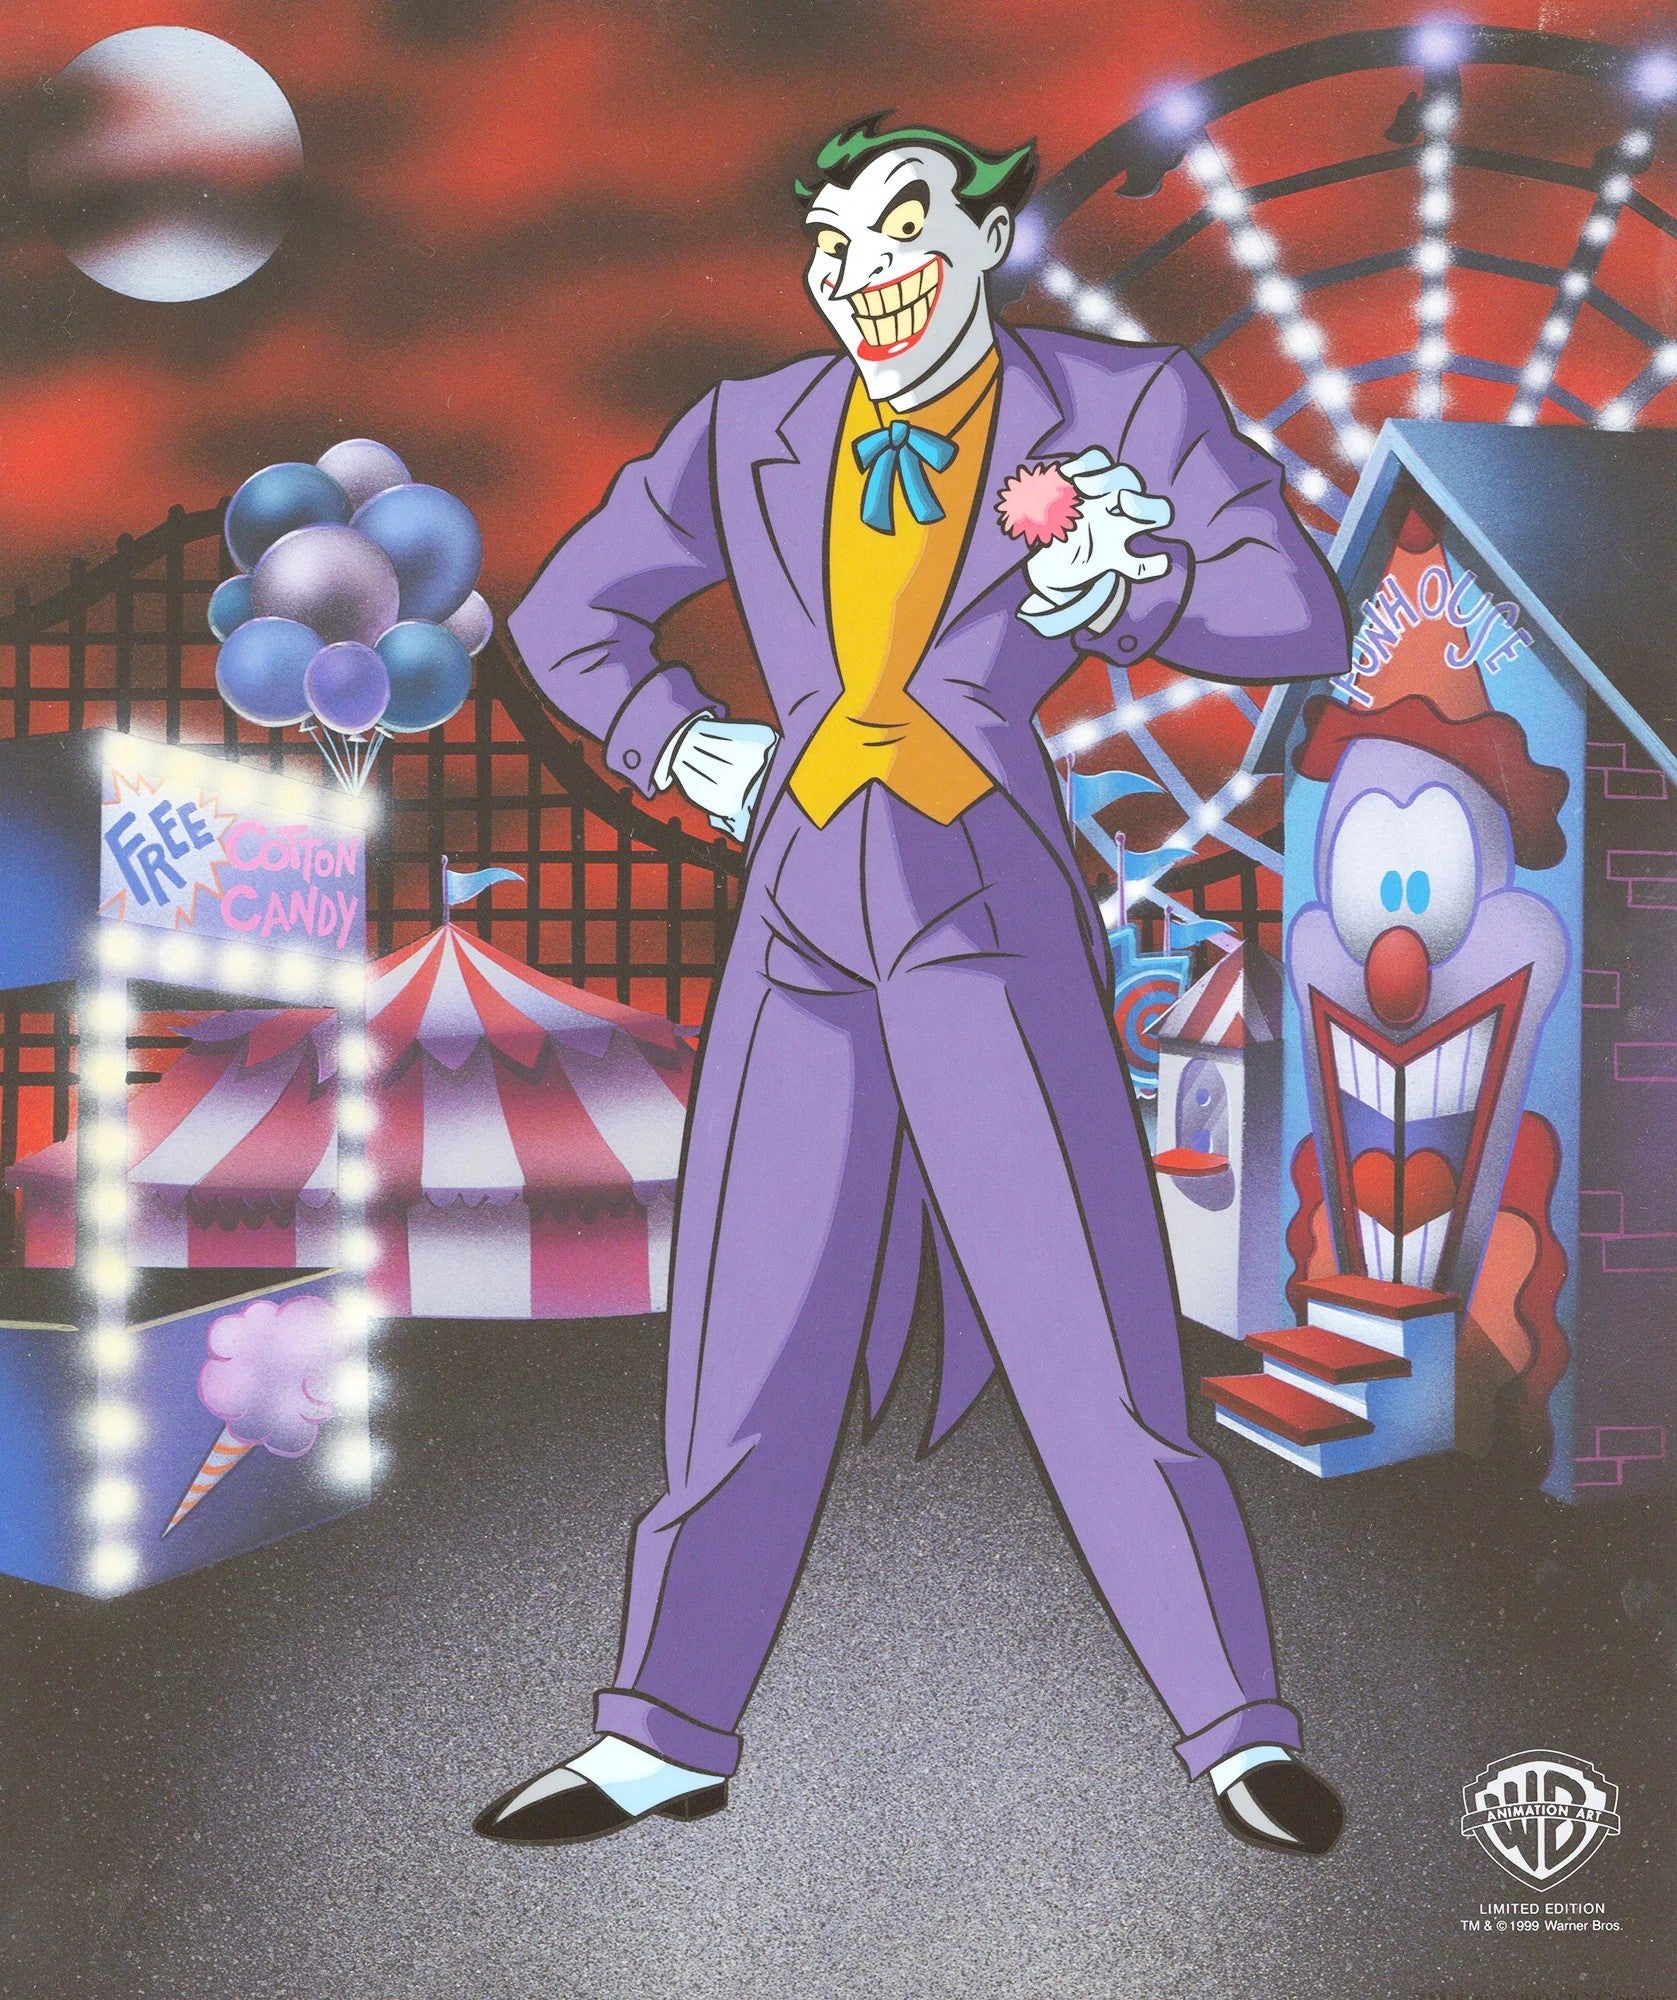 Classic Joker - Limited Edition Hand-Painted Cel featuring Batman